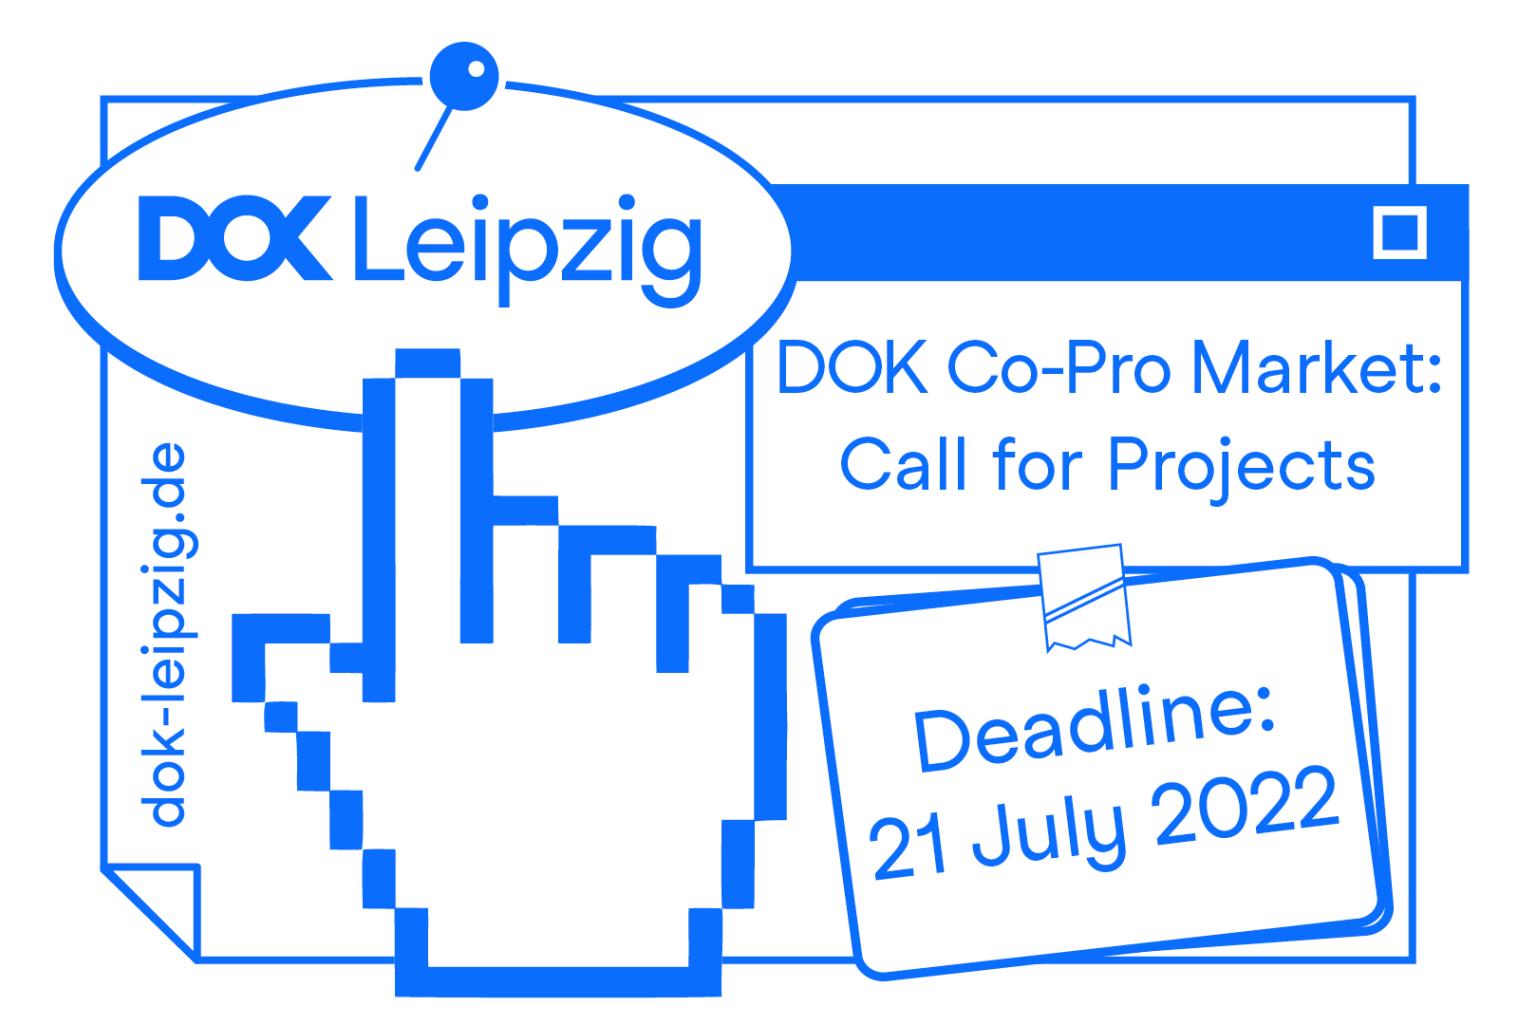 A white graphic with elements and text in blue. The hand icon of a computer mouse clicks on the DOK Leipzig logo. Next to this some text: DOK Co-Pro Market  Call for Projects. Deadline: 21 July 2022"